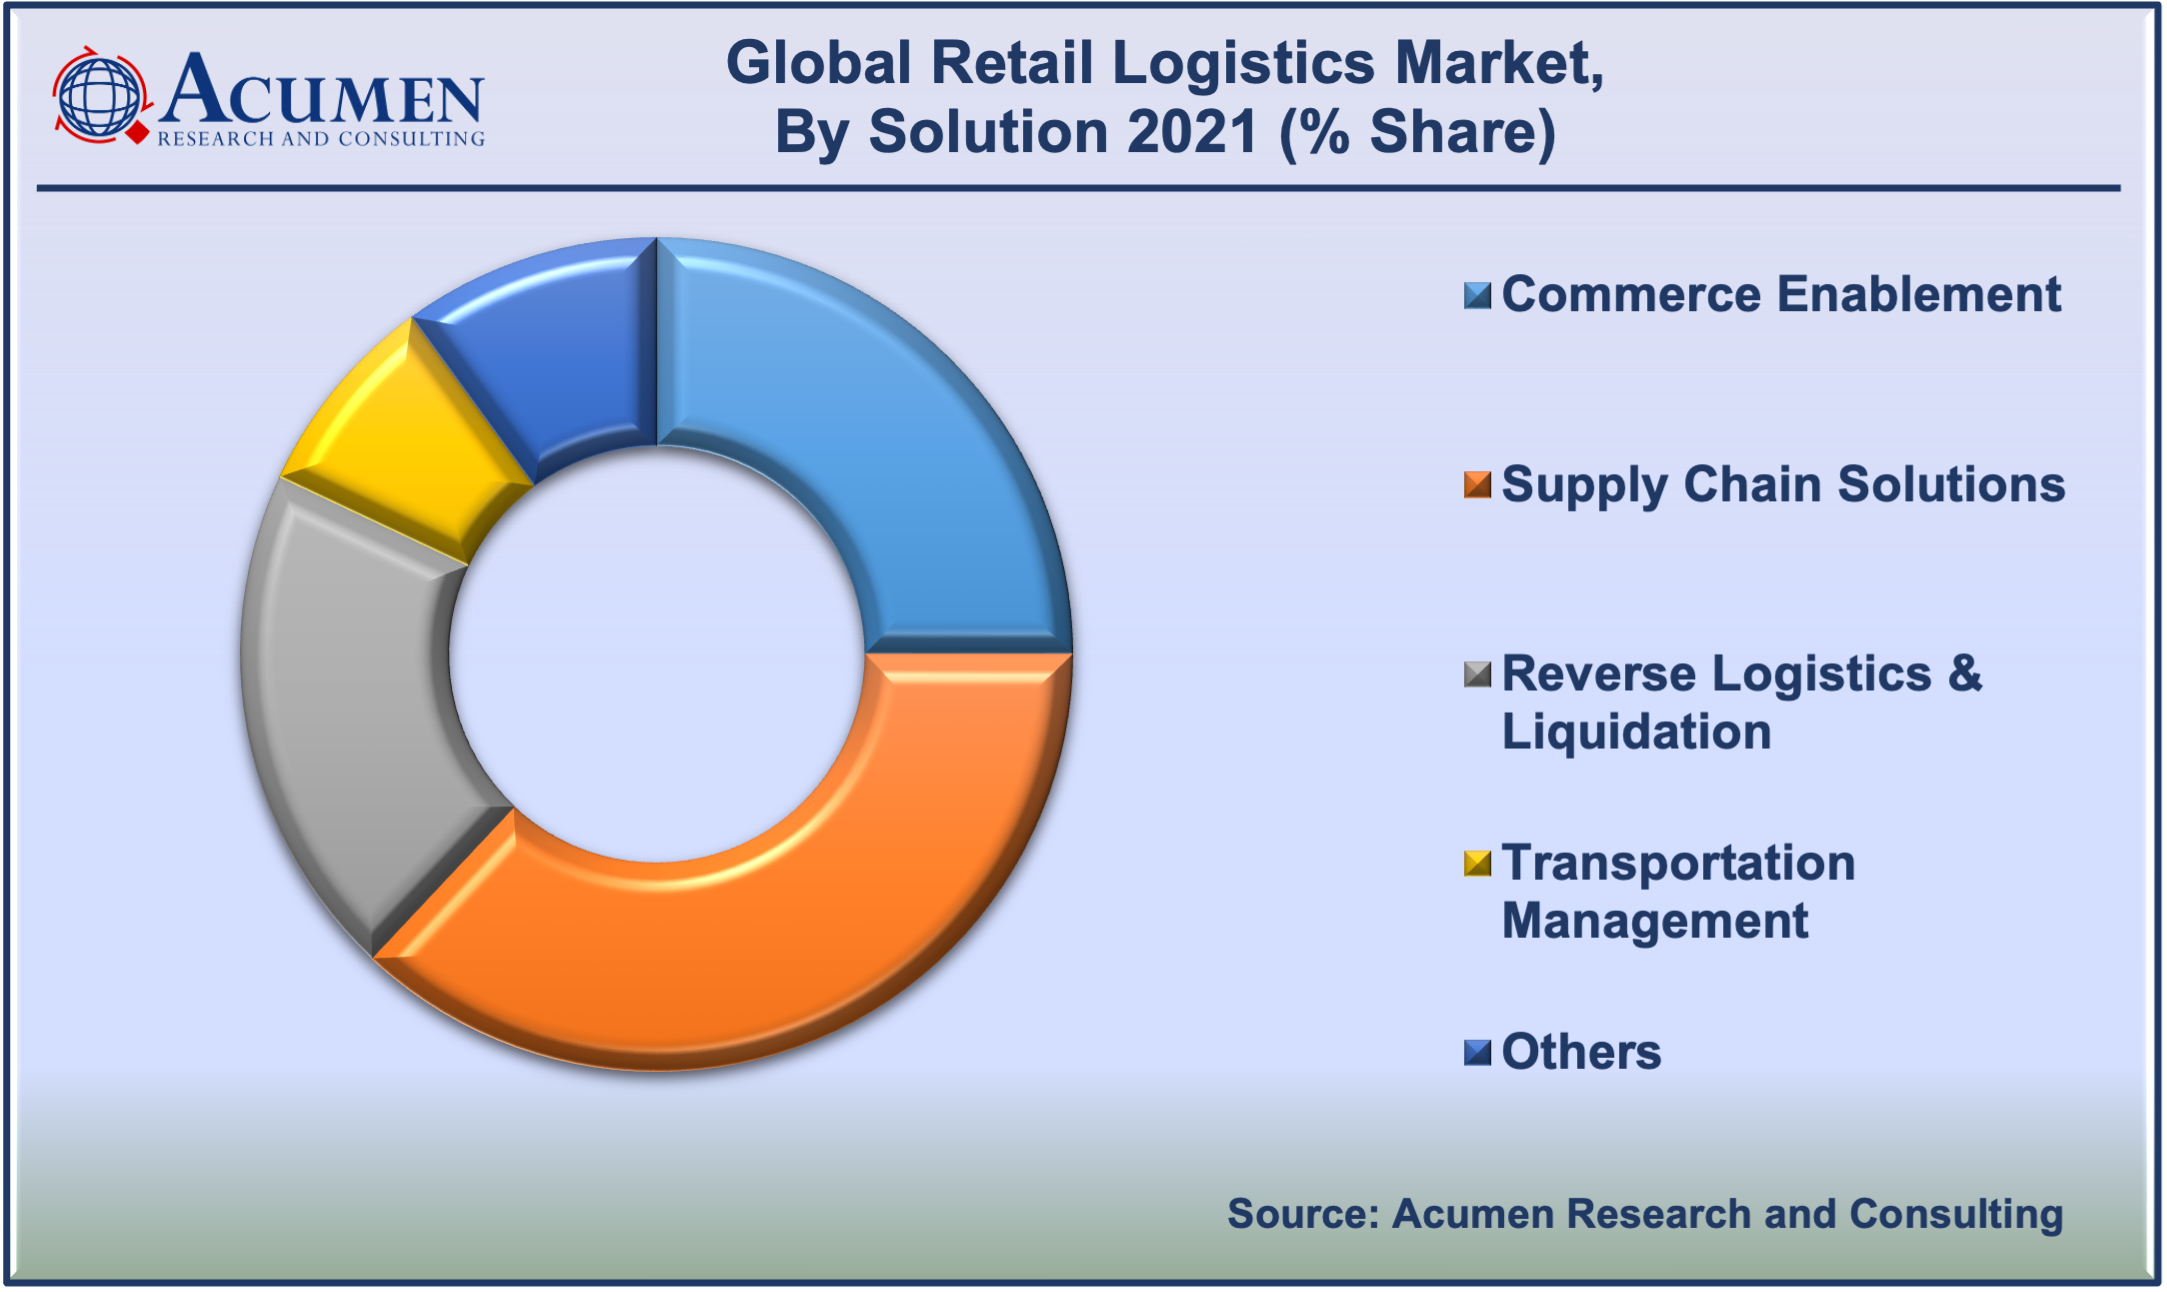 Retail Logistics Market Analysis accounted for USD 231 Billion in 2021 and is estimated to reach USD 622 Billion by 2030.